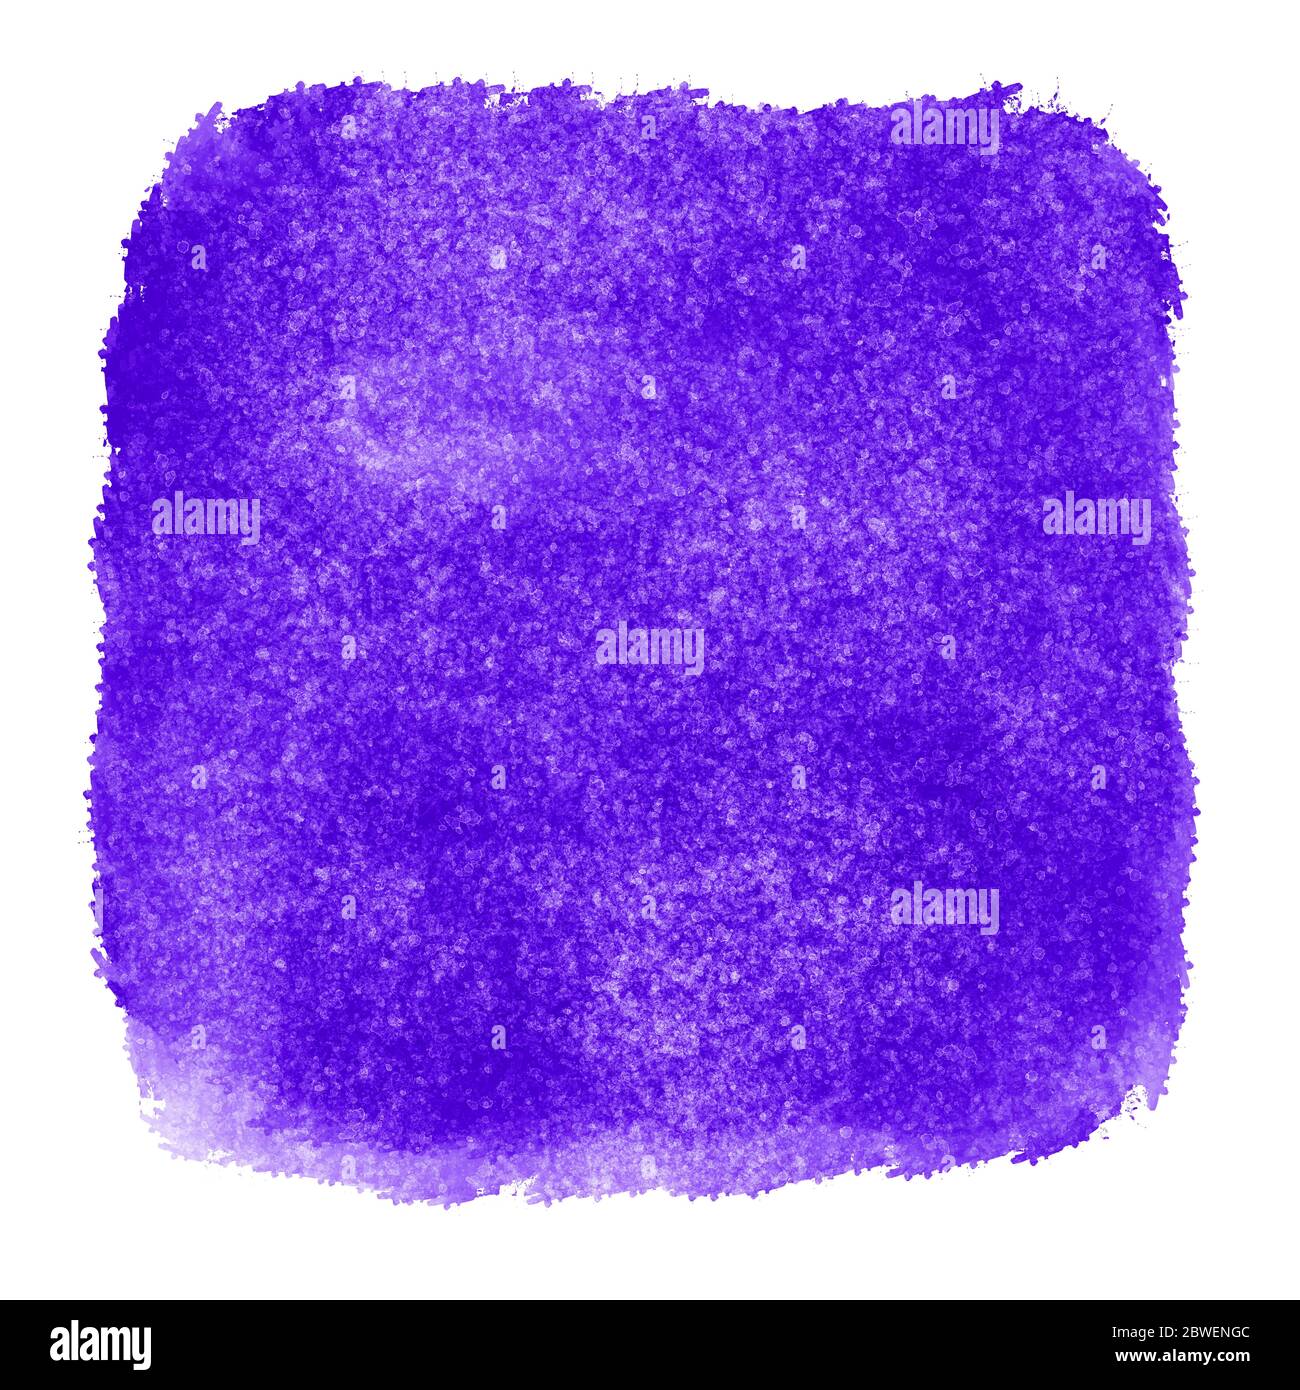 Purple textured backdrop wallpaper background. Hand drawing square watercolor paint on paper. Rugged grunge texture aquarelle hue Stock Photo